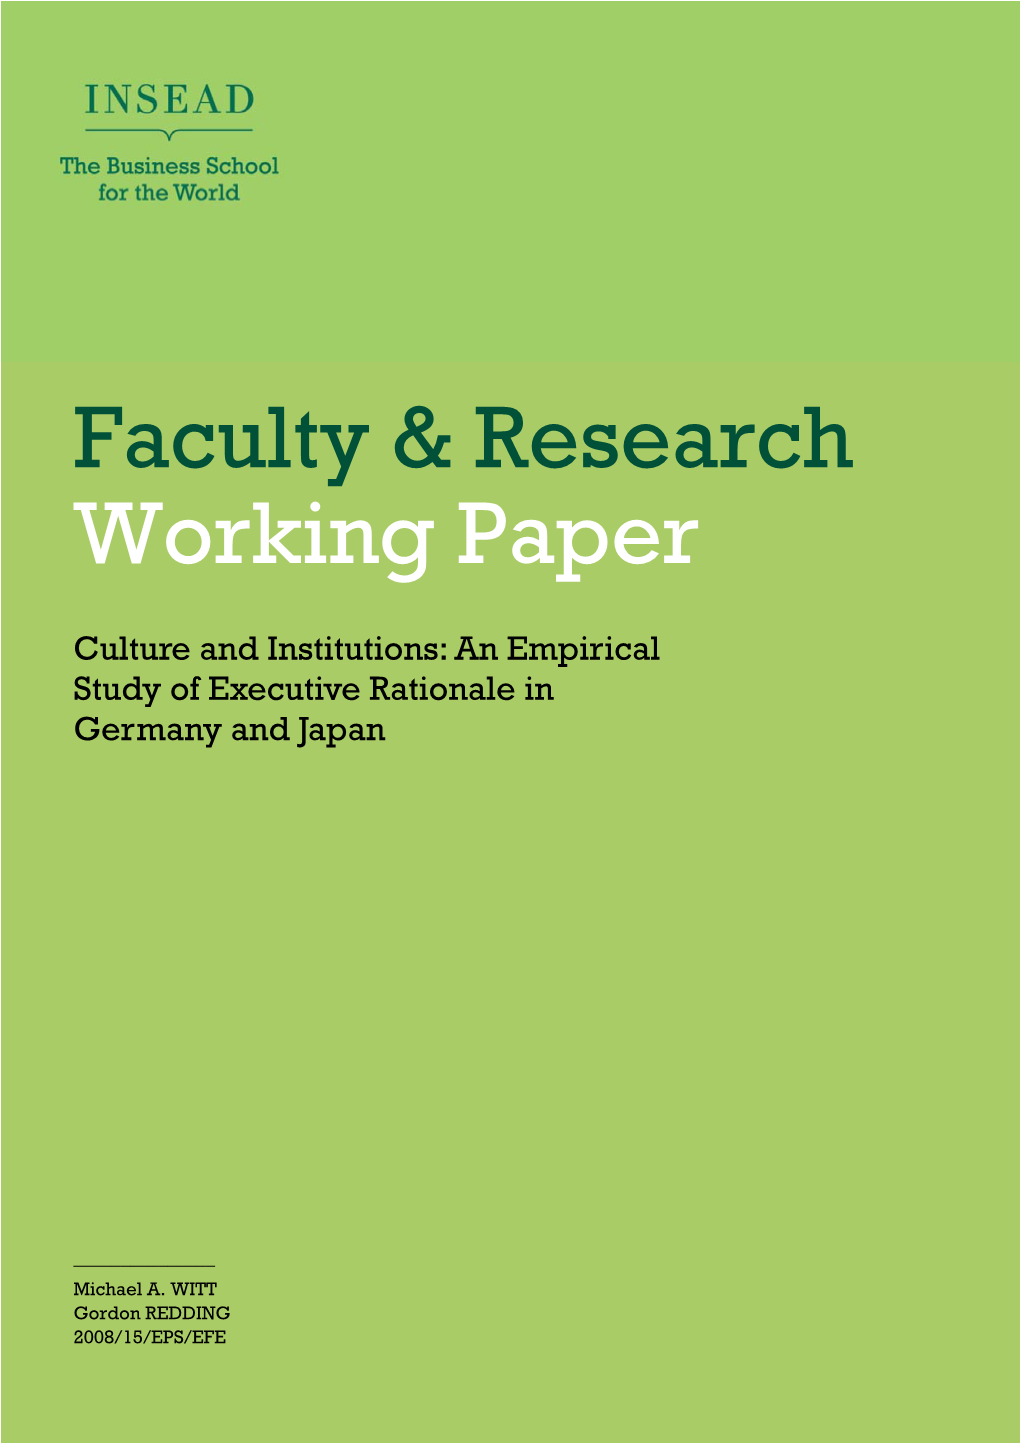 Faculty & Research Working Paper